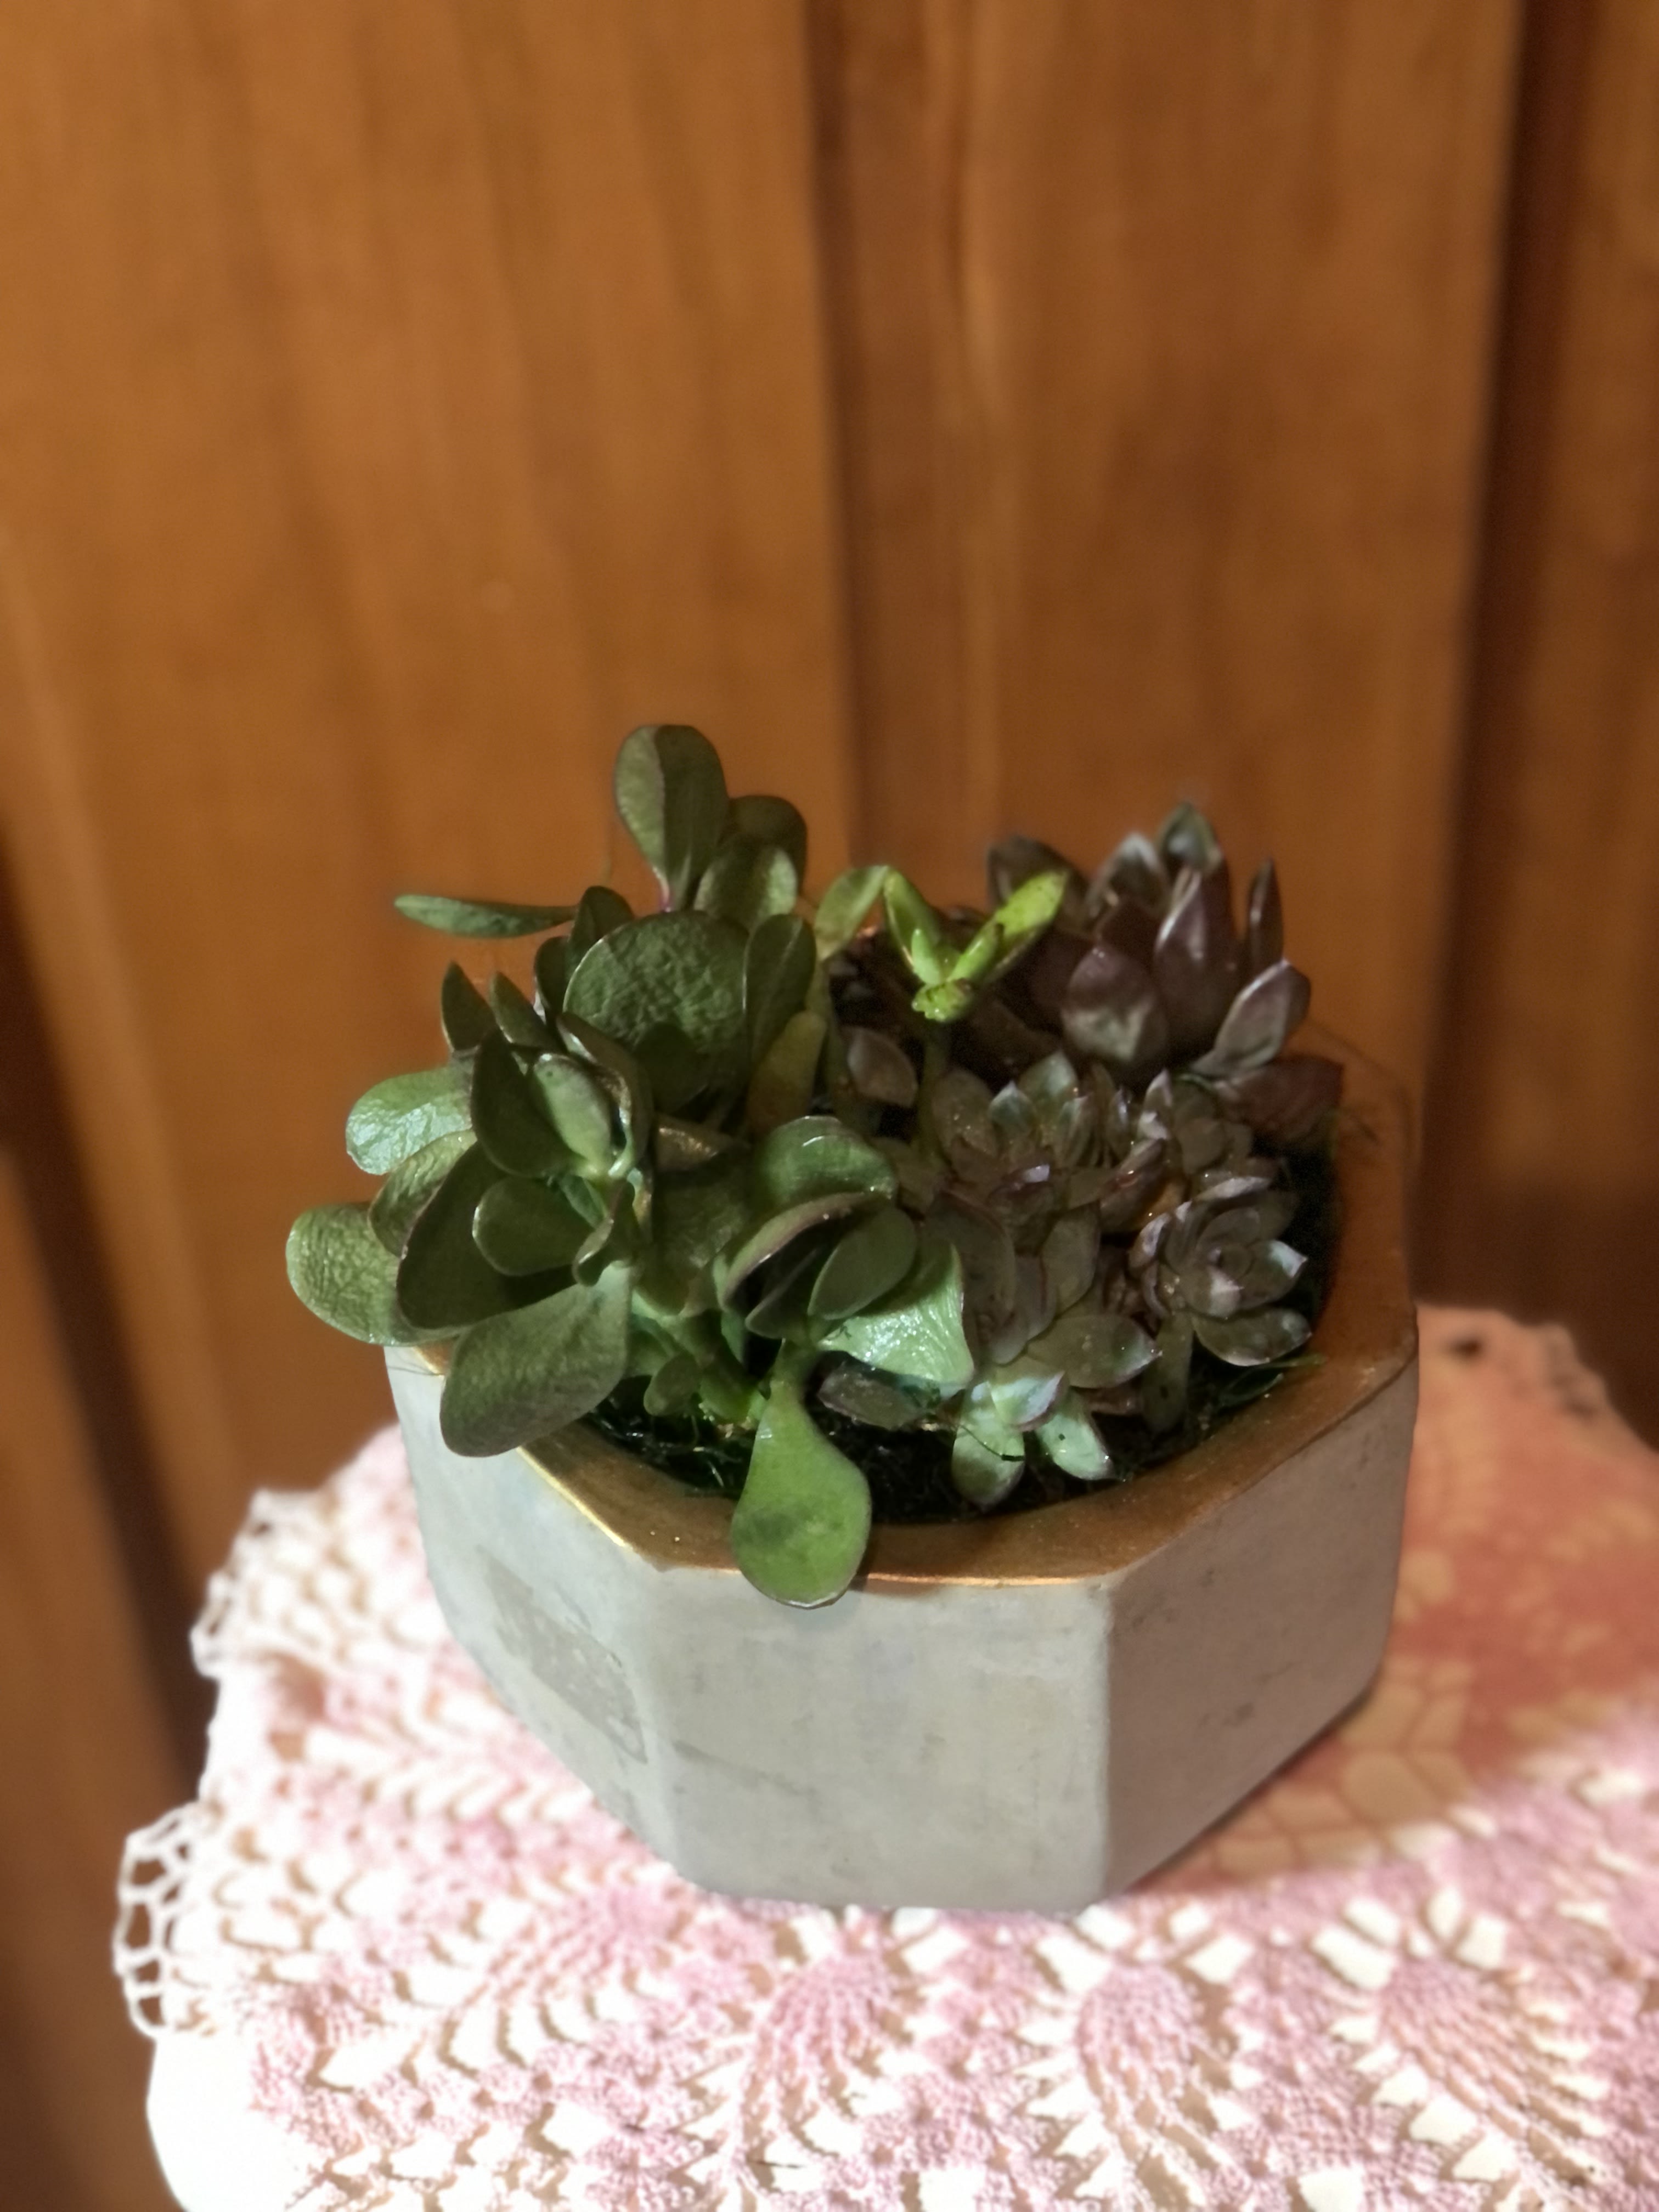  Terra Cotta Dream - Our  Terra Cotta Dream is an easy to care for succulent garden. An assortment of our favorite succulents nestled into a ceramic container. Can be used indoor or out during the warmer months of the year. Layered with sand, soil and fertilizer for a year's worth of carefree growing. Mist lightly when soil is dry to the touch. Please see our blog about the &quot;toothpick method&quot; as this is the best way to water a succulent garden.